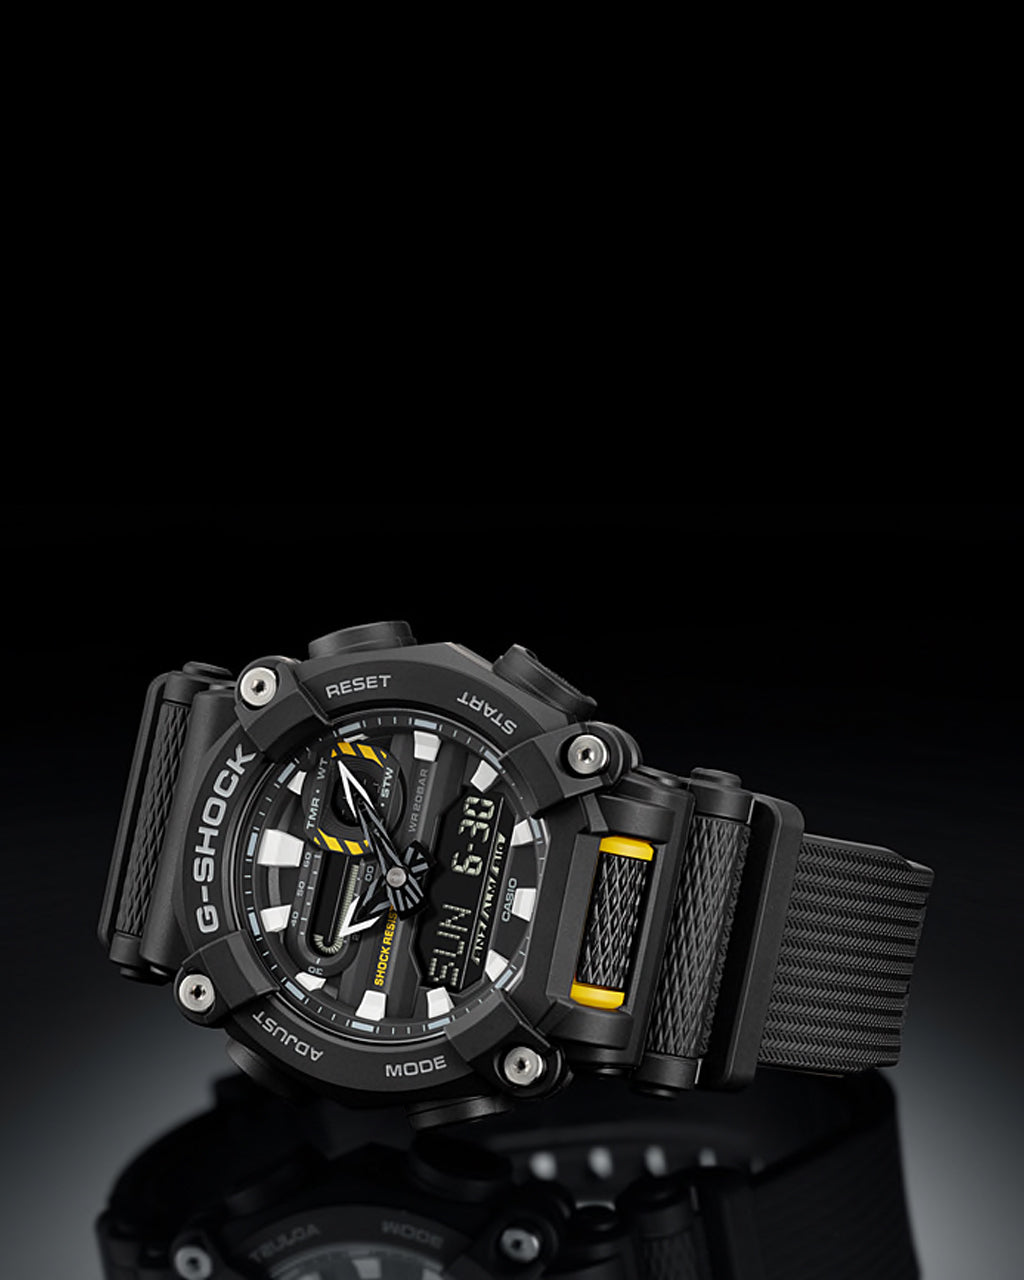 Experience the Durability and Style of the G-Shock GA900-1A Watch